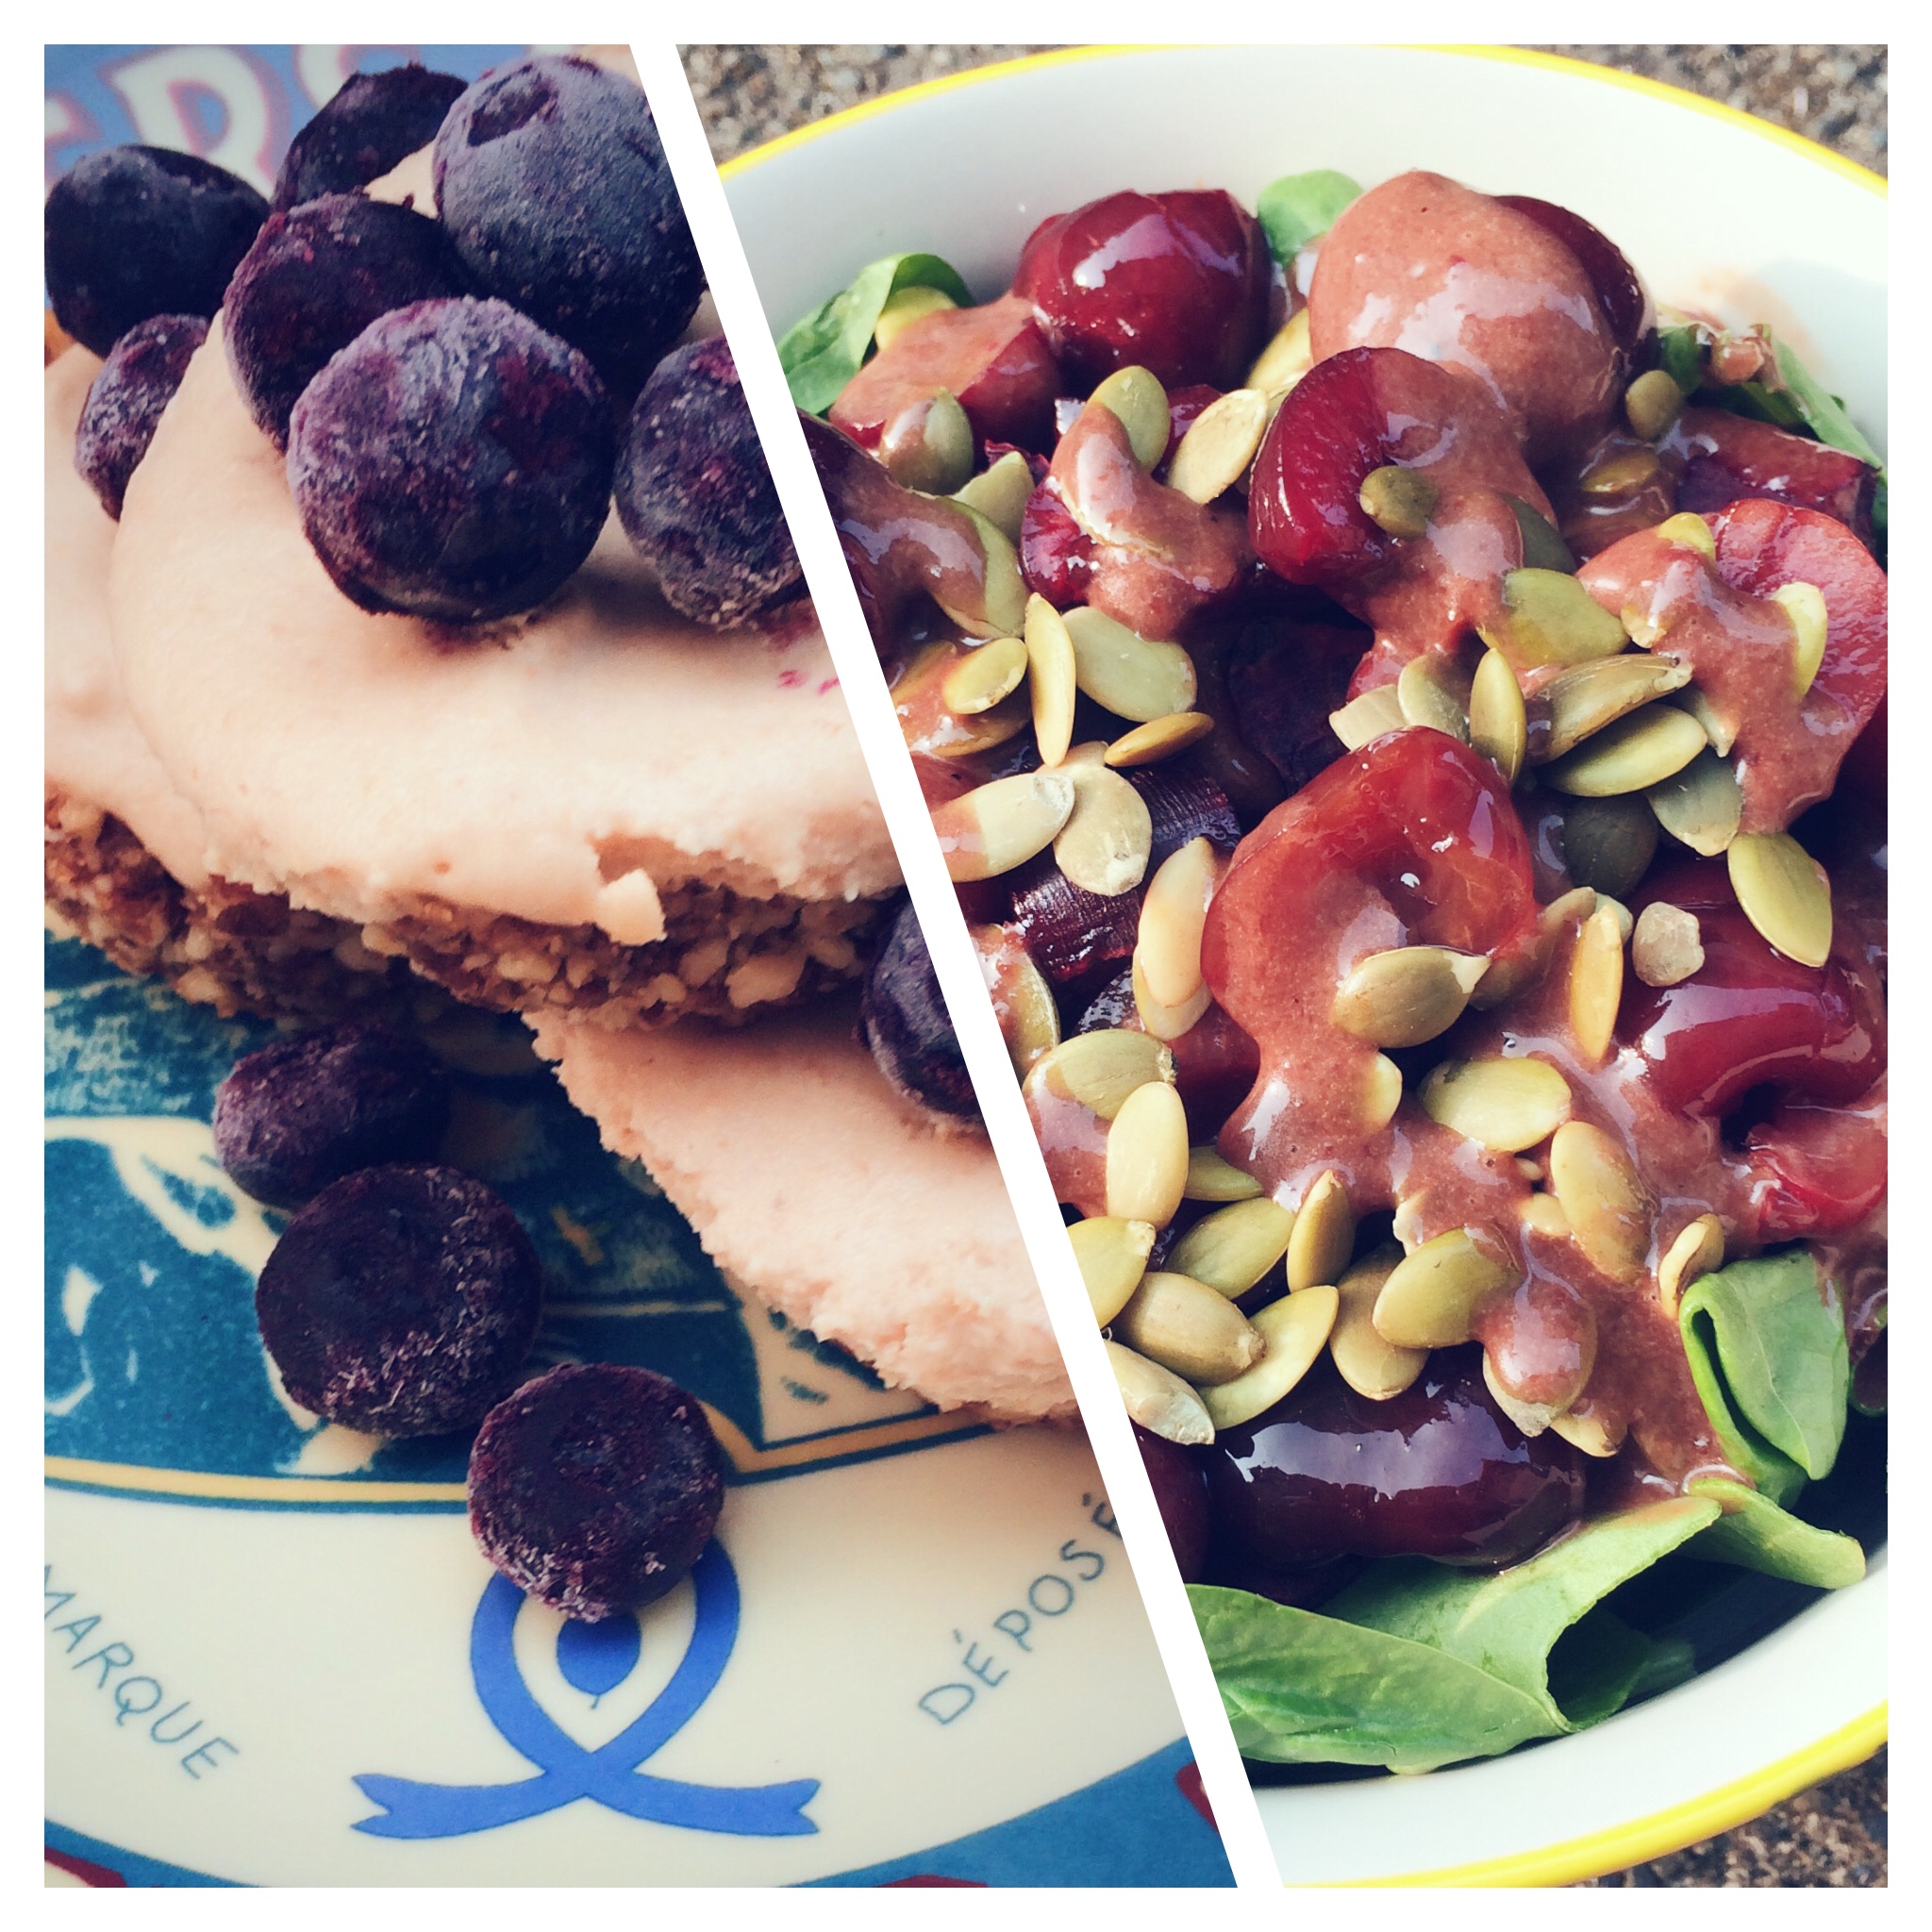 Review of the Minimalist Baker’s Kale Cherry Salad and Cheesecakes